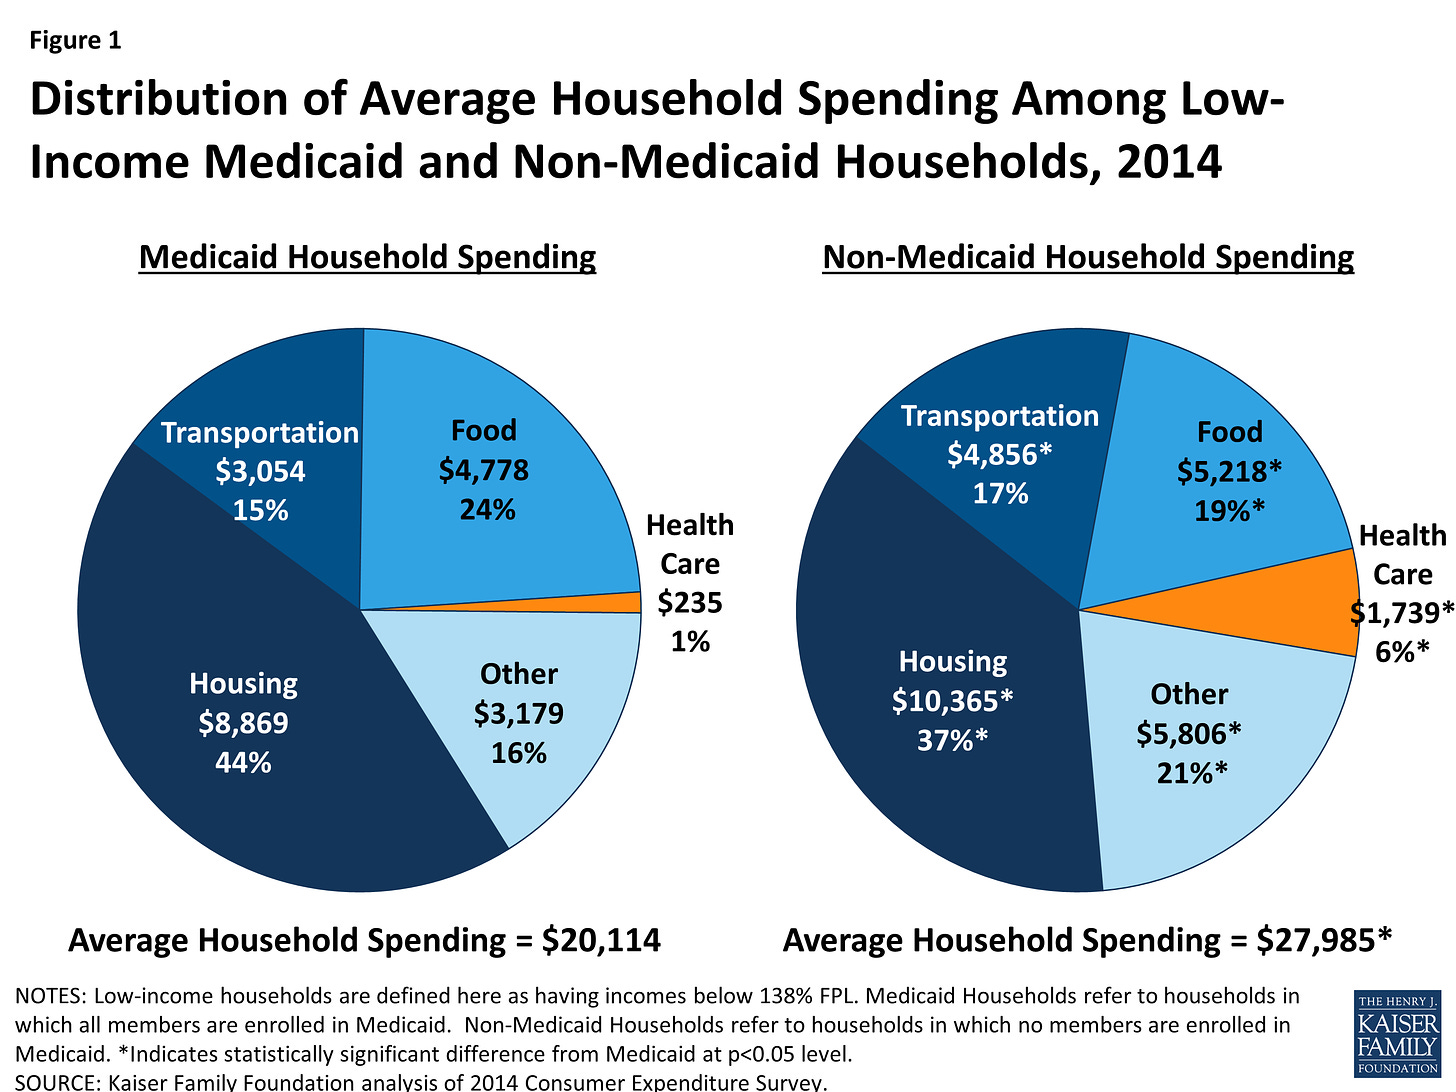 Health Care Spending Among Low-Income Households with and without Medicaid  | KFF